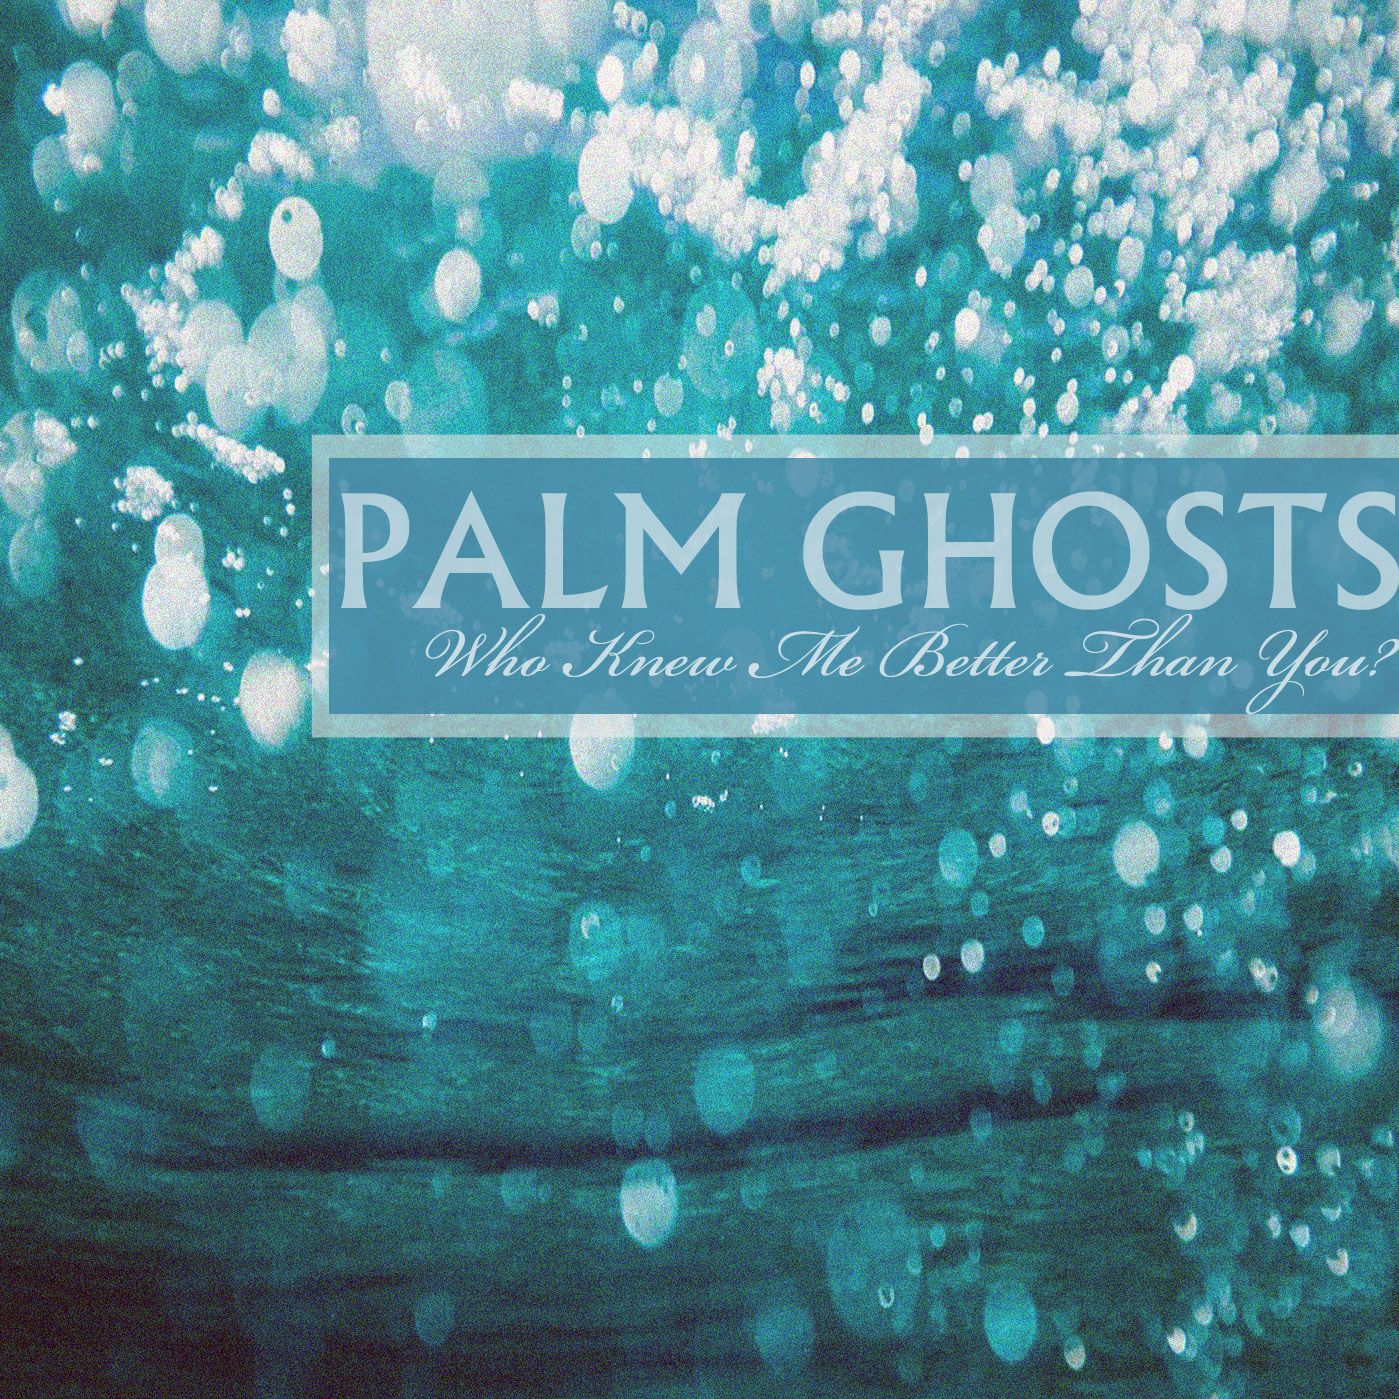 Palm Ghosts – “Who Knew Me Better Than You”